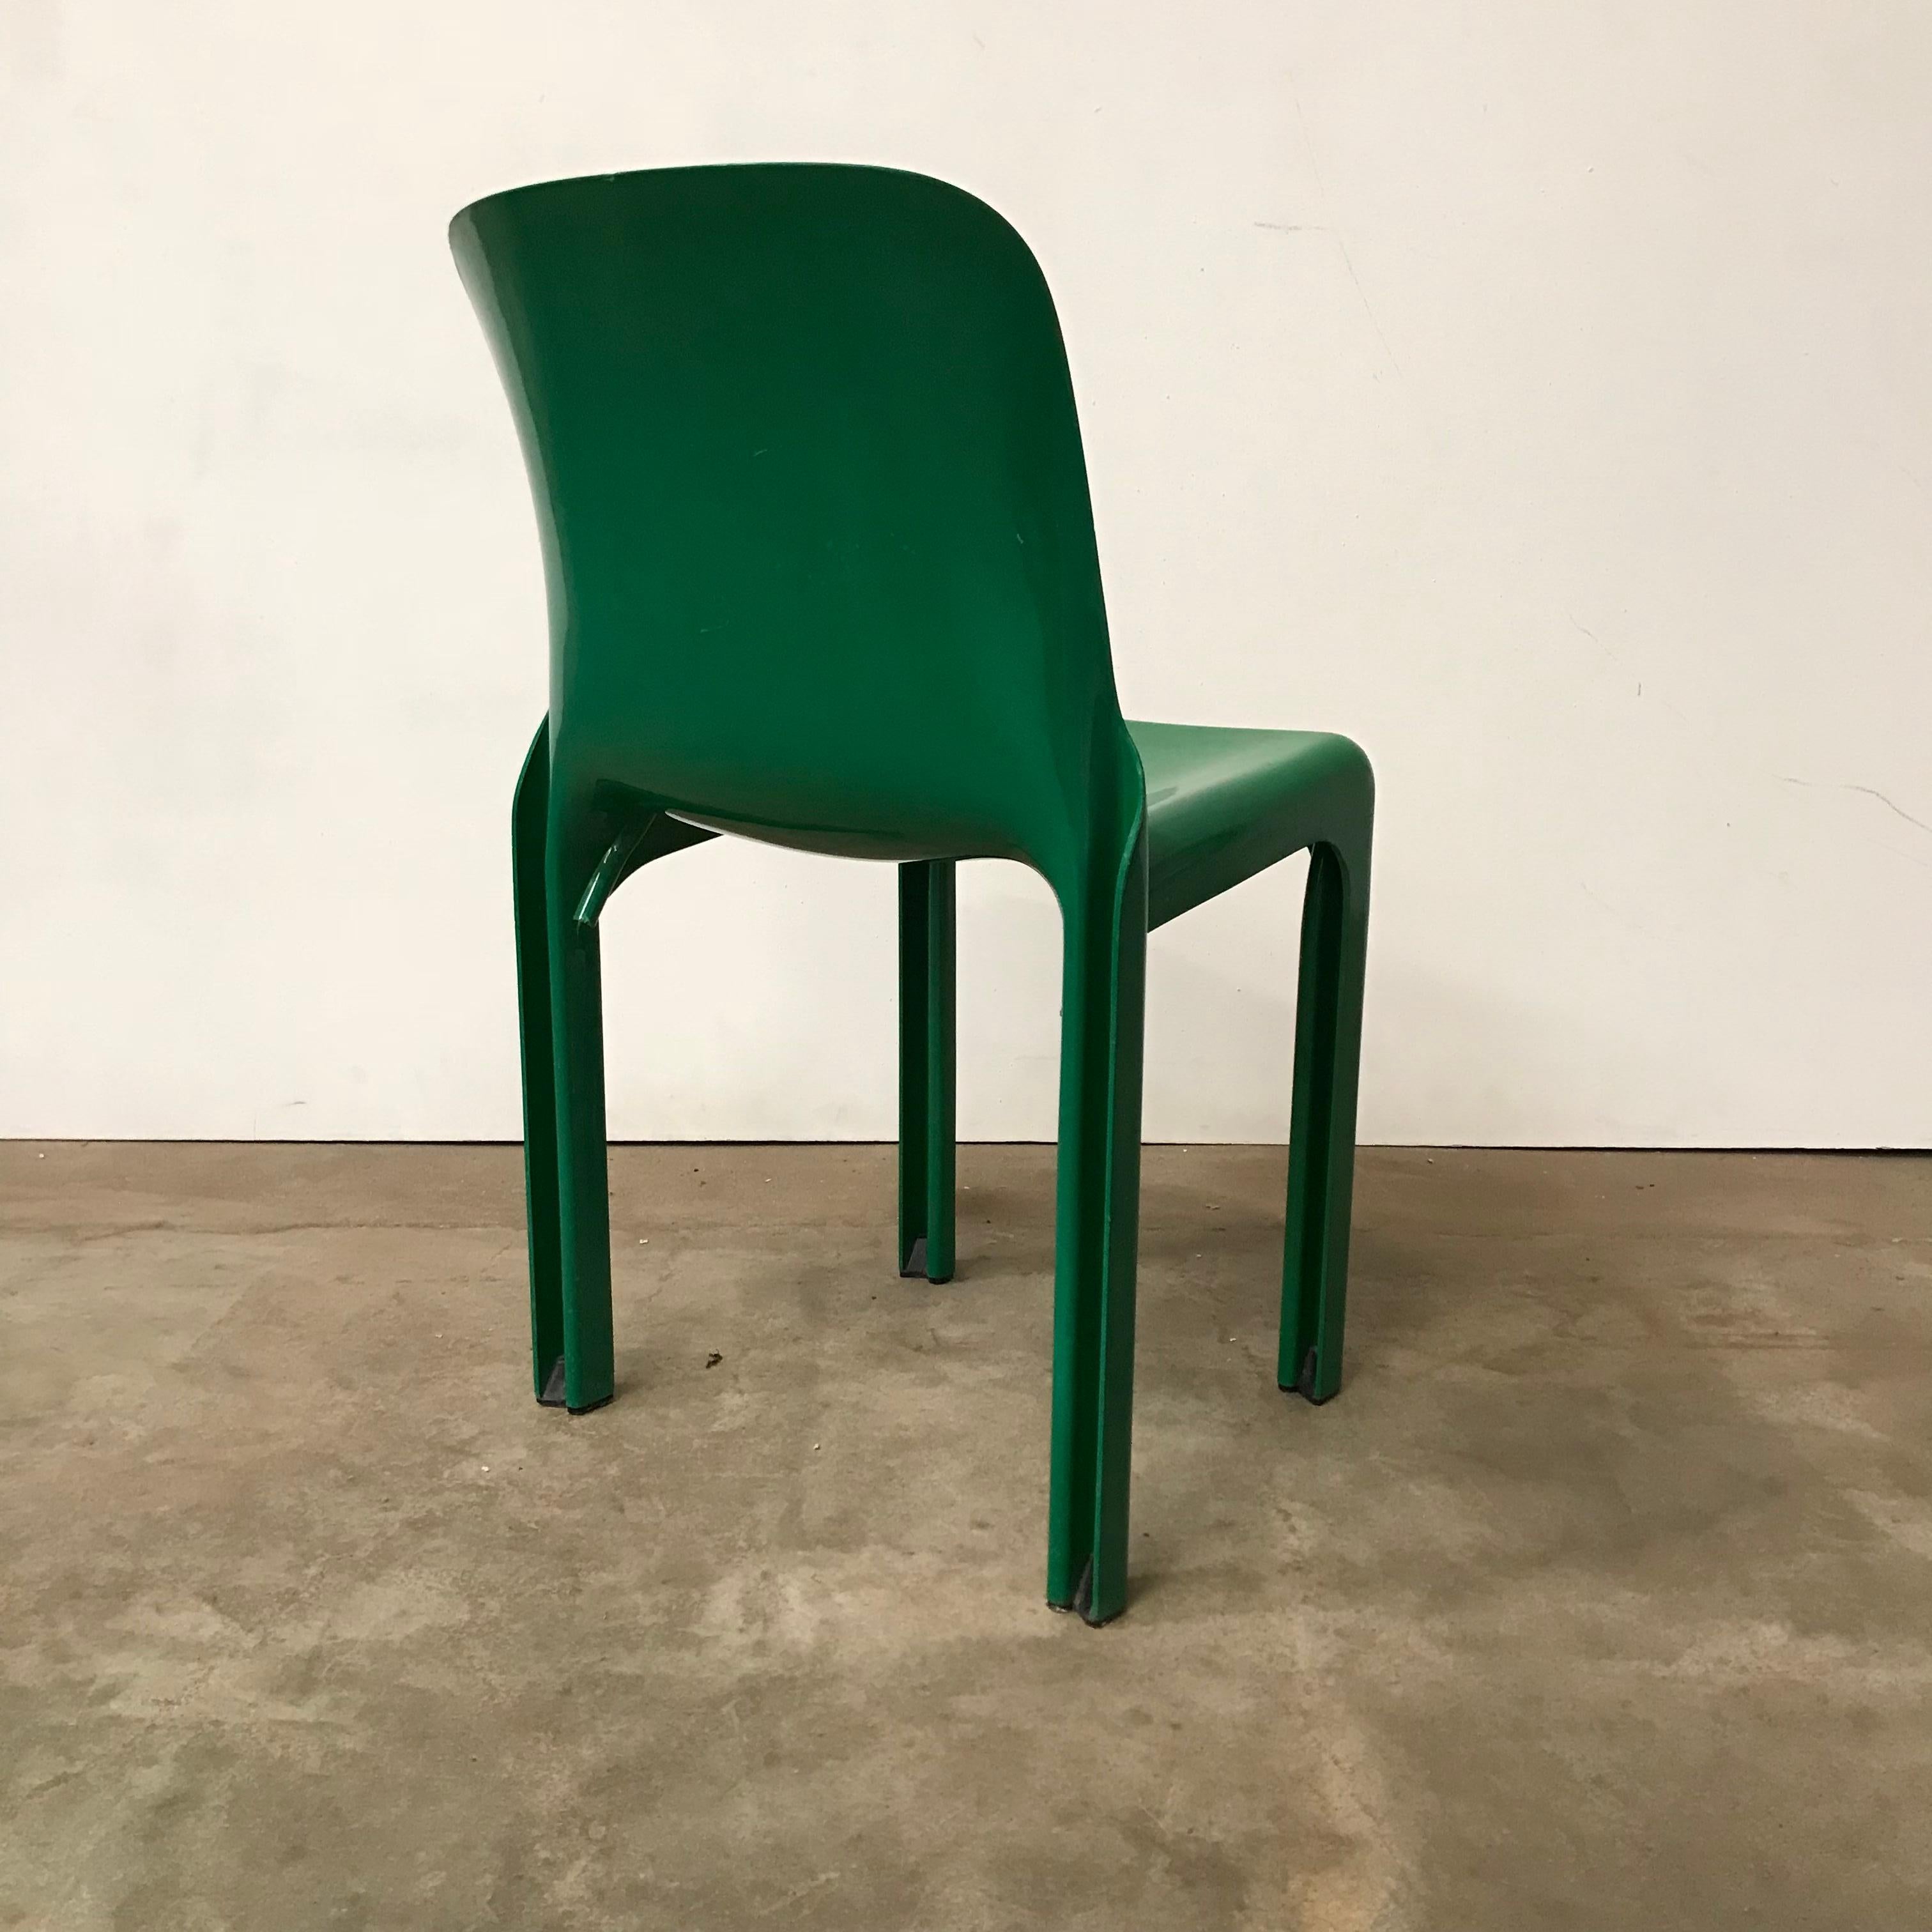 Selene chair in beautiful green. The chair is in good condition except for some small scratches on the seat (picture #7) and little damage above the left leg (#11) and some other scratches. Also a tiny chip came off from the edge on top of the back